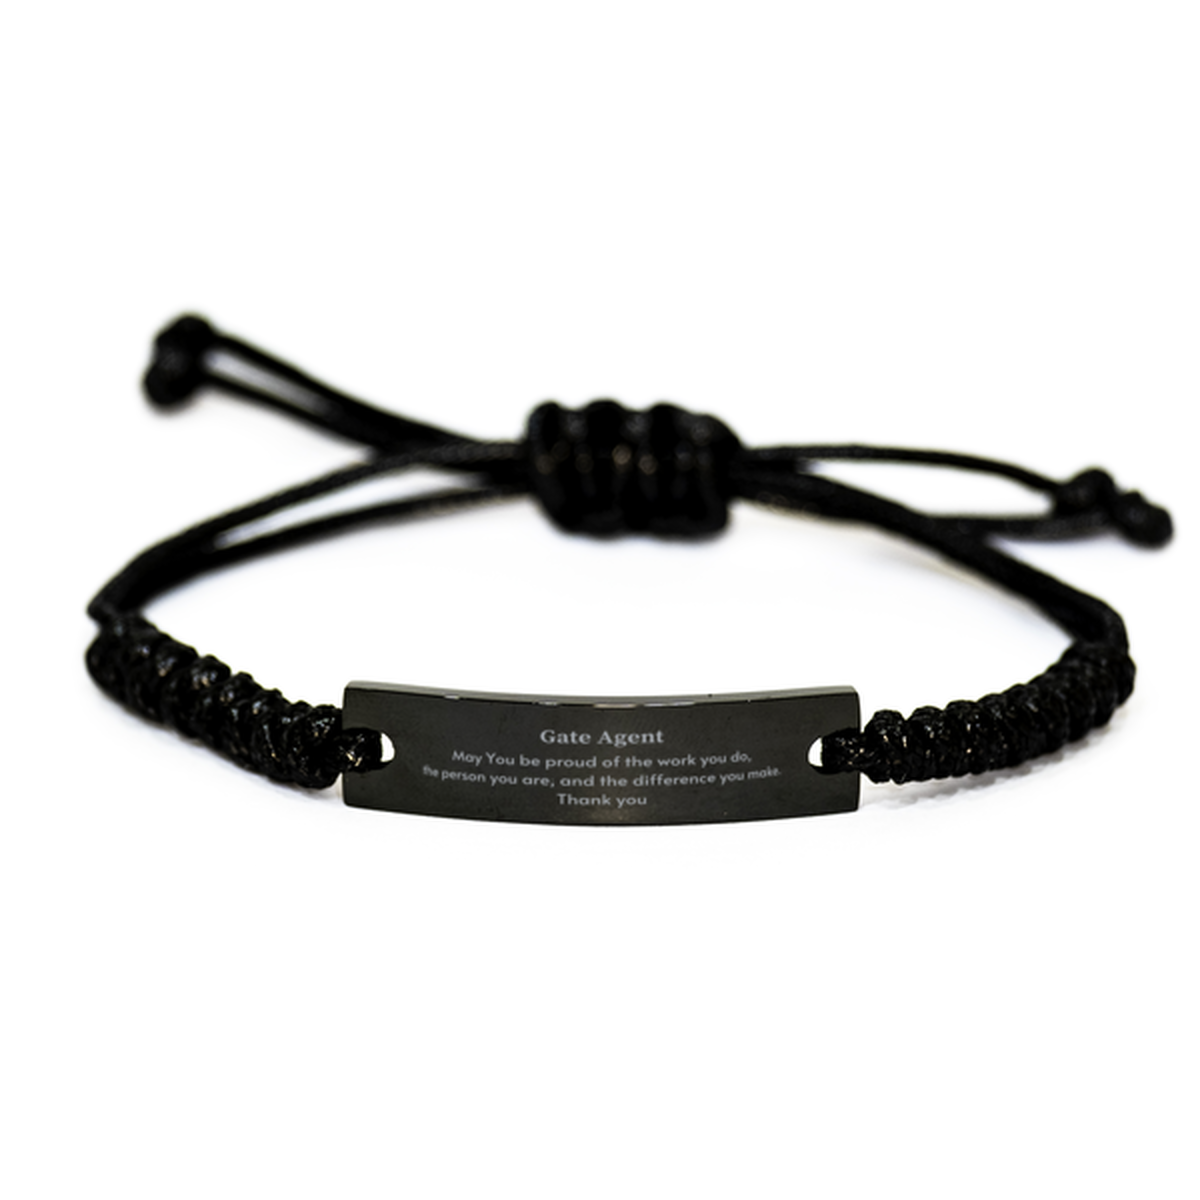 Heartwarming Black Rope Bracelet Retirement Coworkers Gifts for Gate Agent, Gate Agent May You be proud of the work you do, the person you are Gifts for Boss Men Women Friends